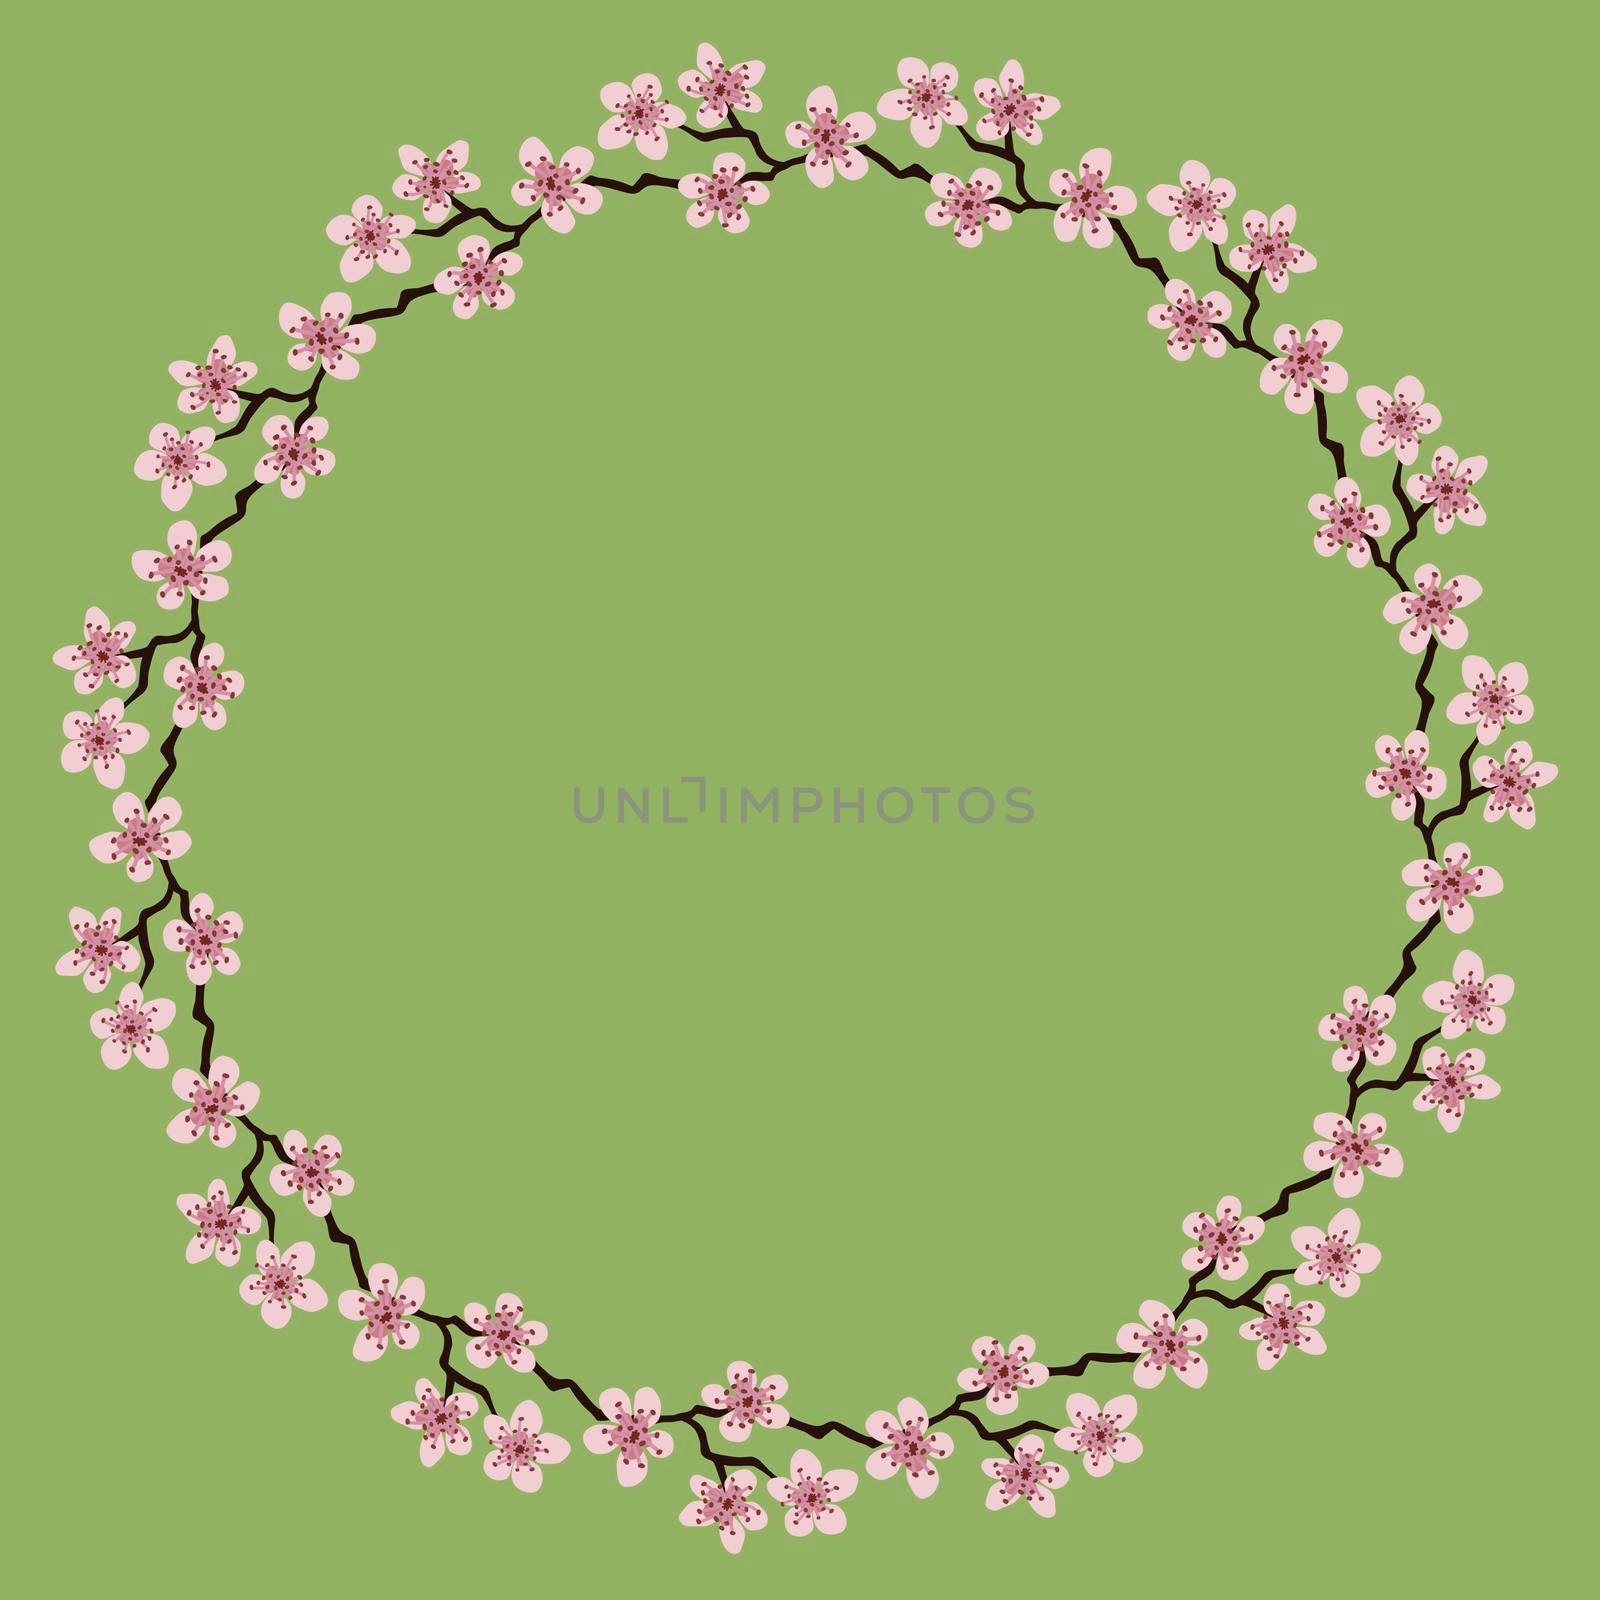 Colorful flowers wreath.Delicate wreath of sakura branches.Flowers blossom hand drawn,circle frame of pink colors flowers on olive.Design for invitation, wedding invitation or greeting cards.Copyspace